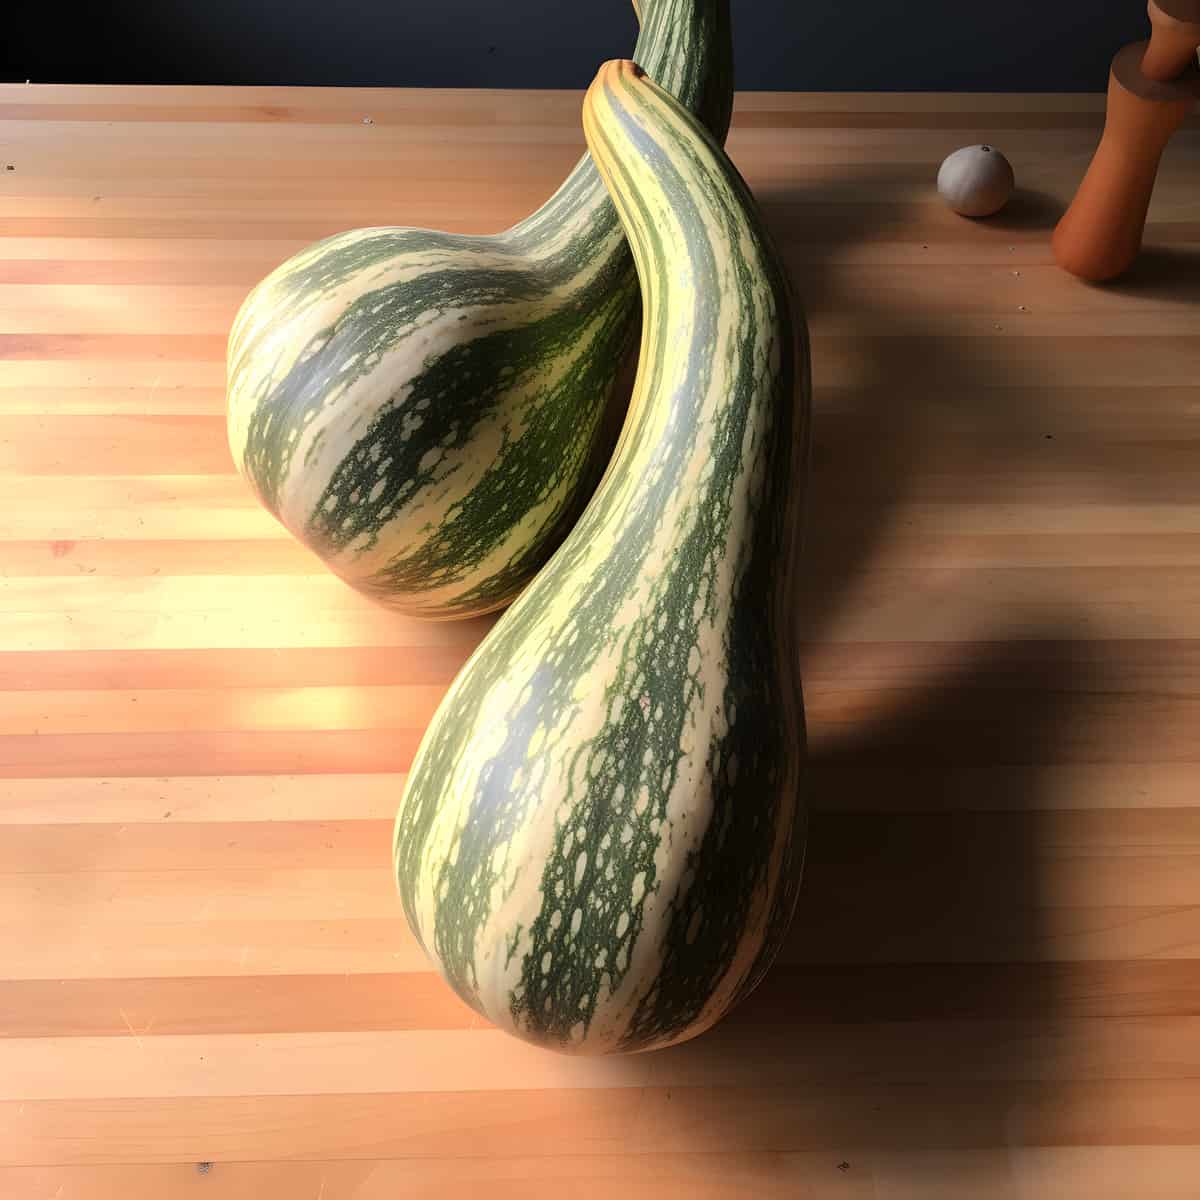 Cushaw Squash on a kitchen counter